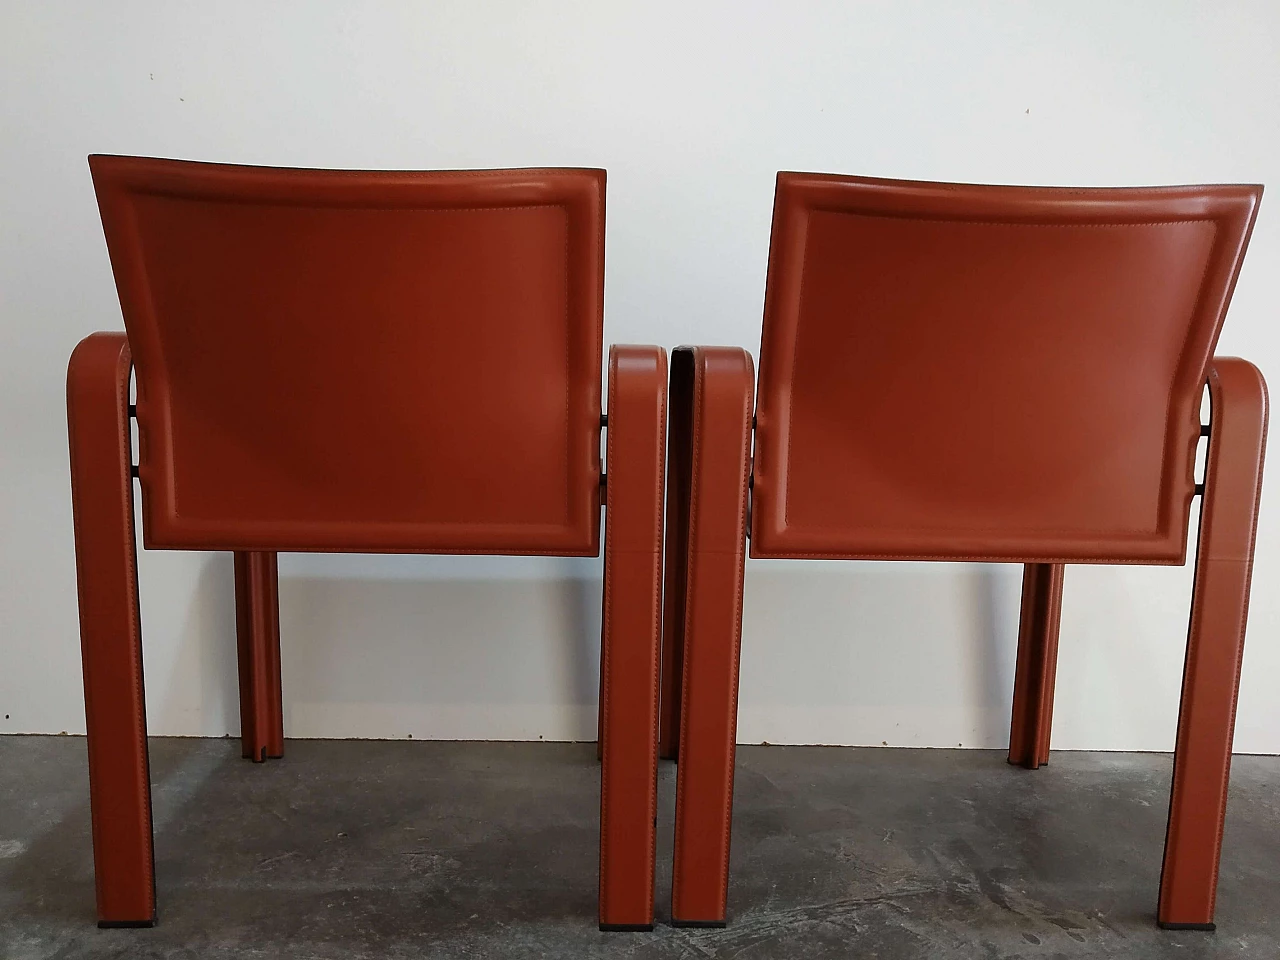 Pair of Golfo dei Poeti chairs by Toussaint & Angeloni manufactured by Matteo Grassi, 1980s 69